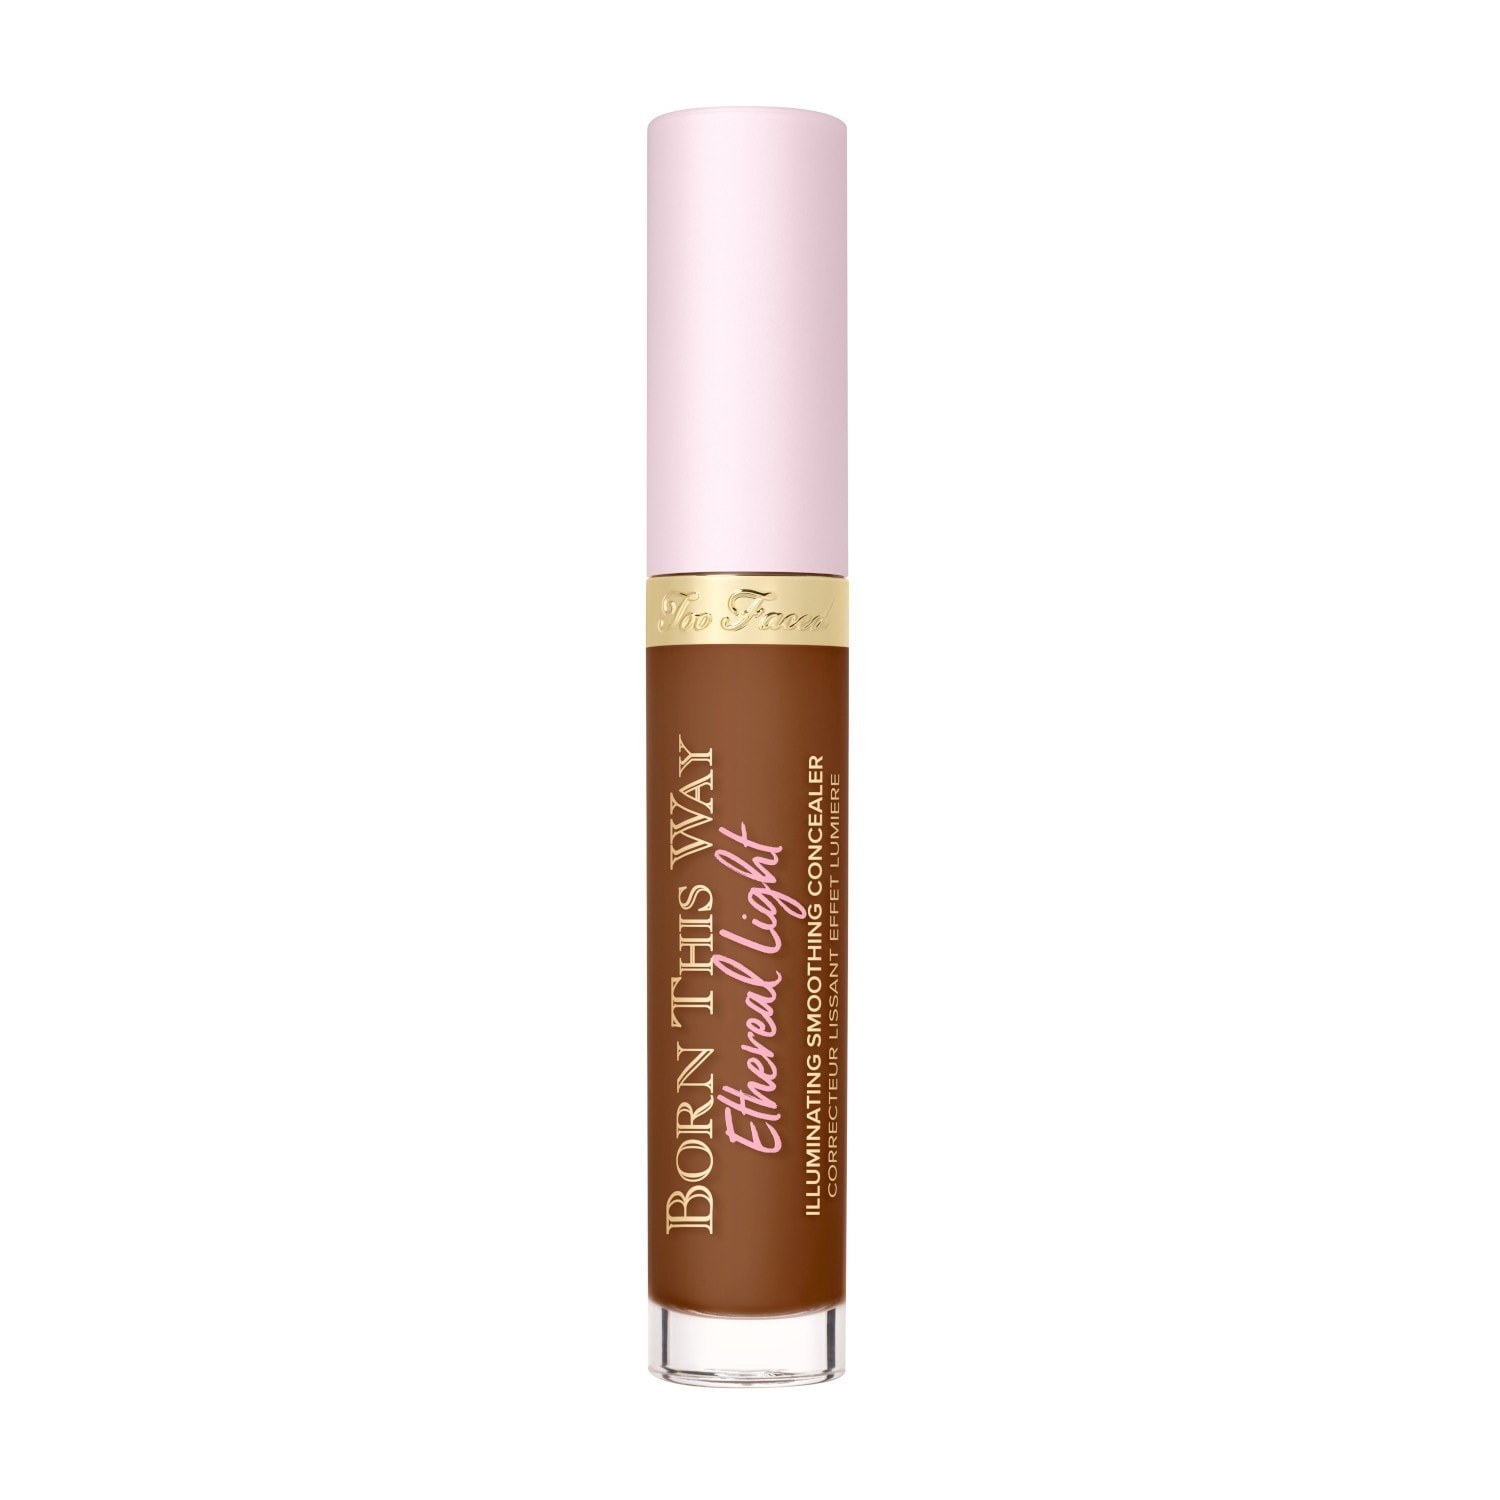 Too Faced Born This Way Ethereal Light Concealer, Milk Chocolate